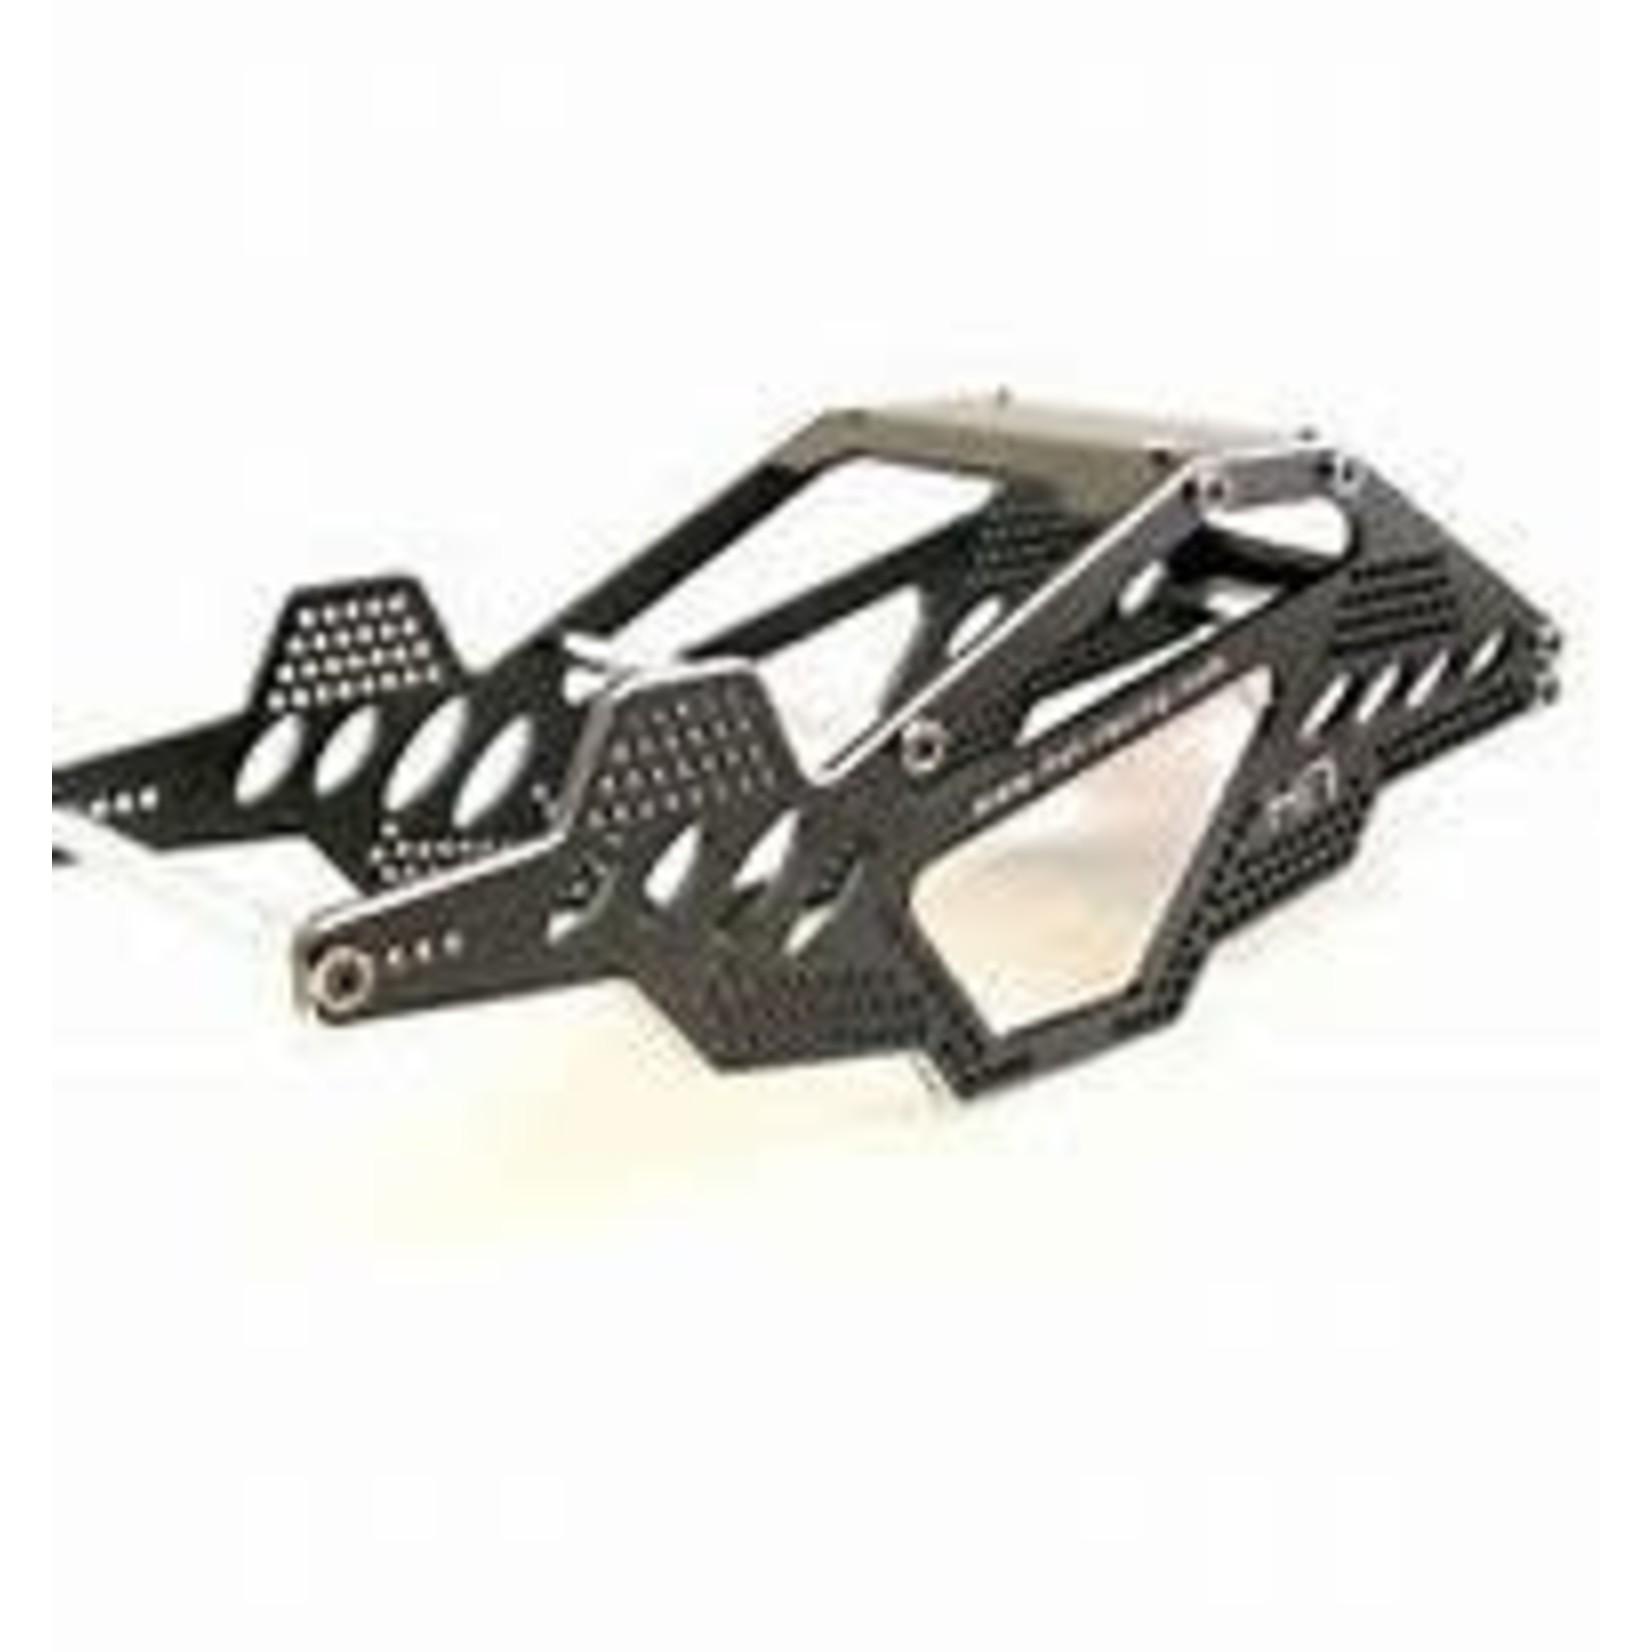 Hot Racing (HR) Aluminum Rock Racer Conversion Chassis